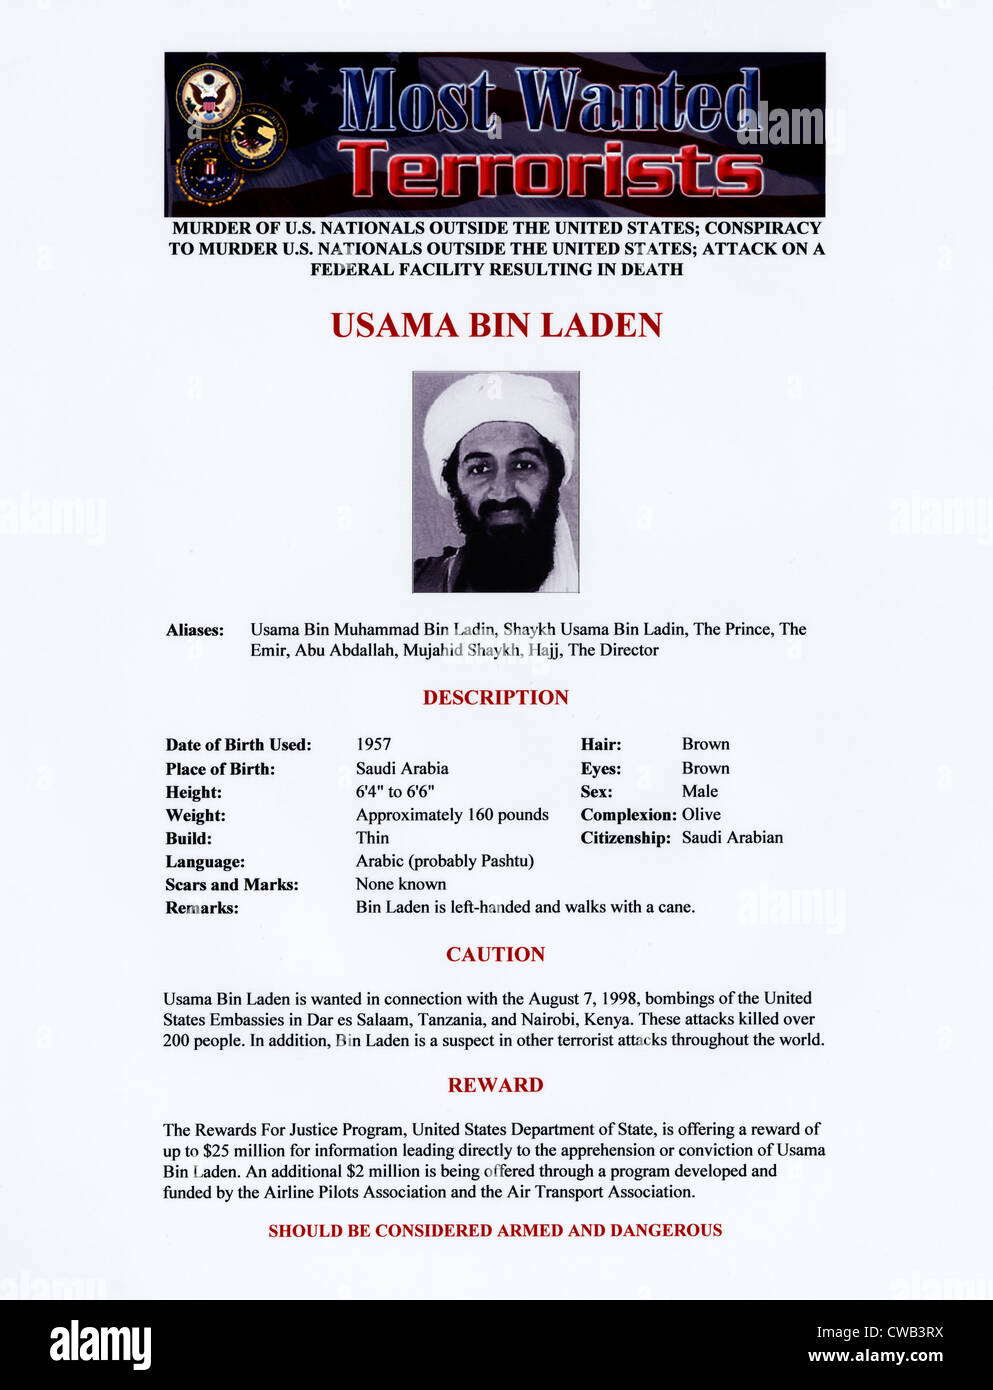 Osama bin Laden, militant Islamist and founder of Al-Qaeda, FBI wanted poster, circa late 1990s-early 2000s. Stock Photo